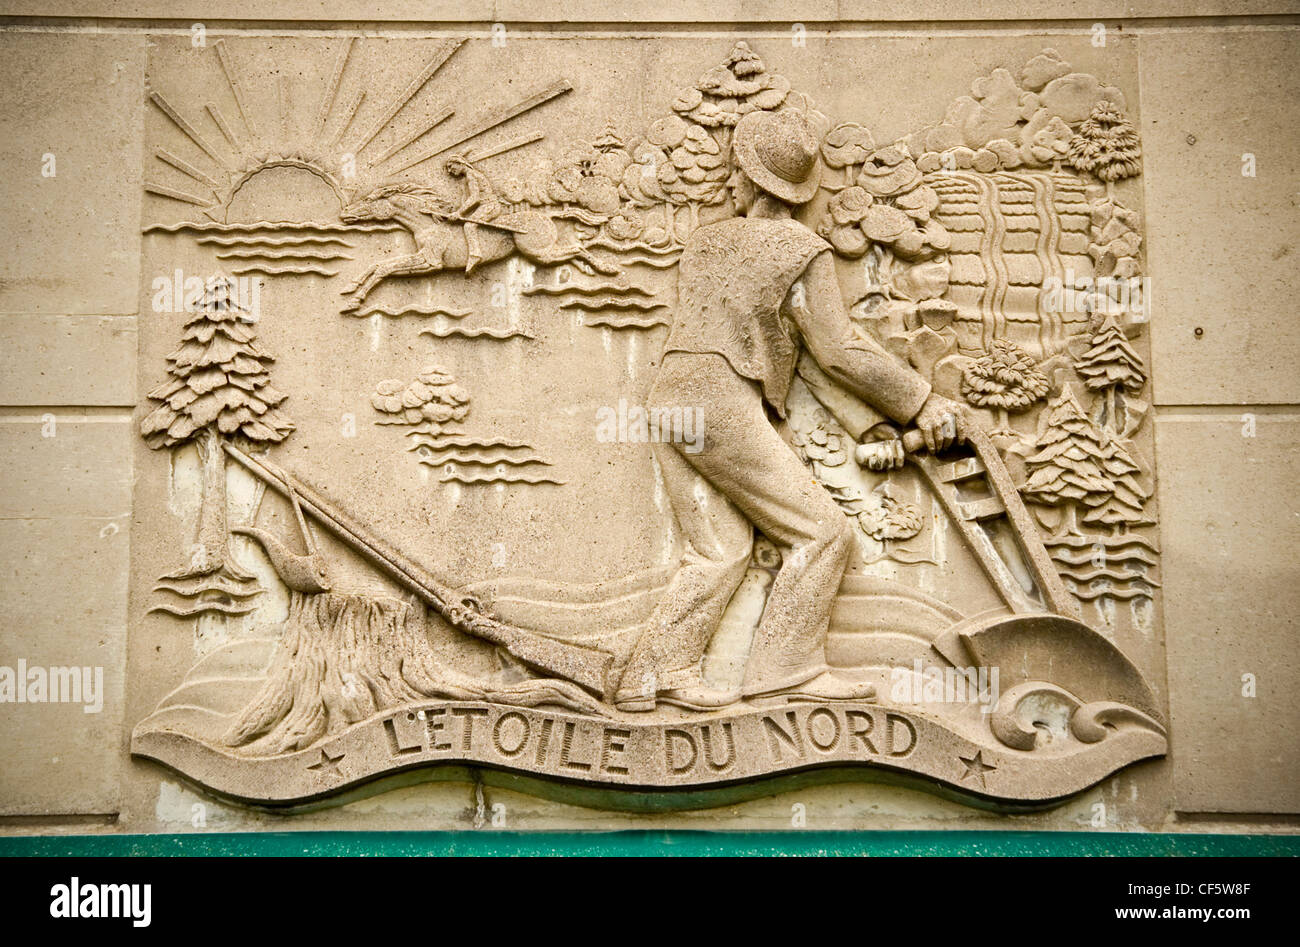 Relief carving of the Great Seal of Minnesota at the Minnesota State Fair grounds in St. Paul. Stock Photo